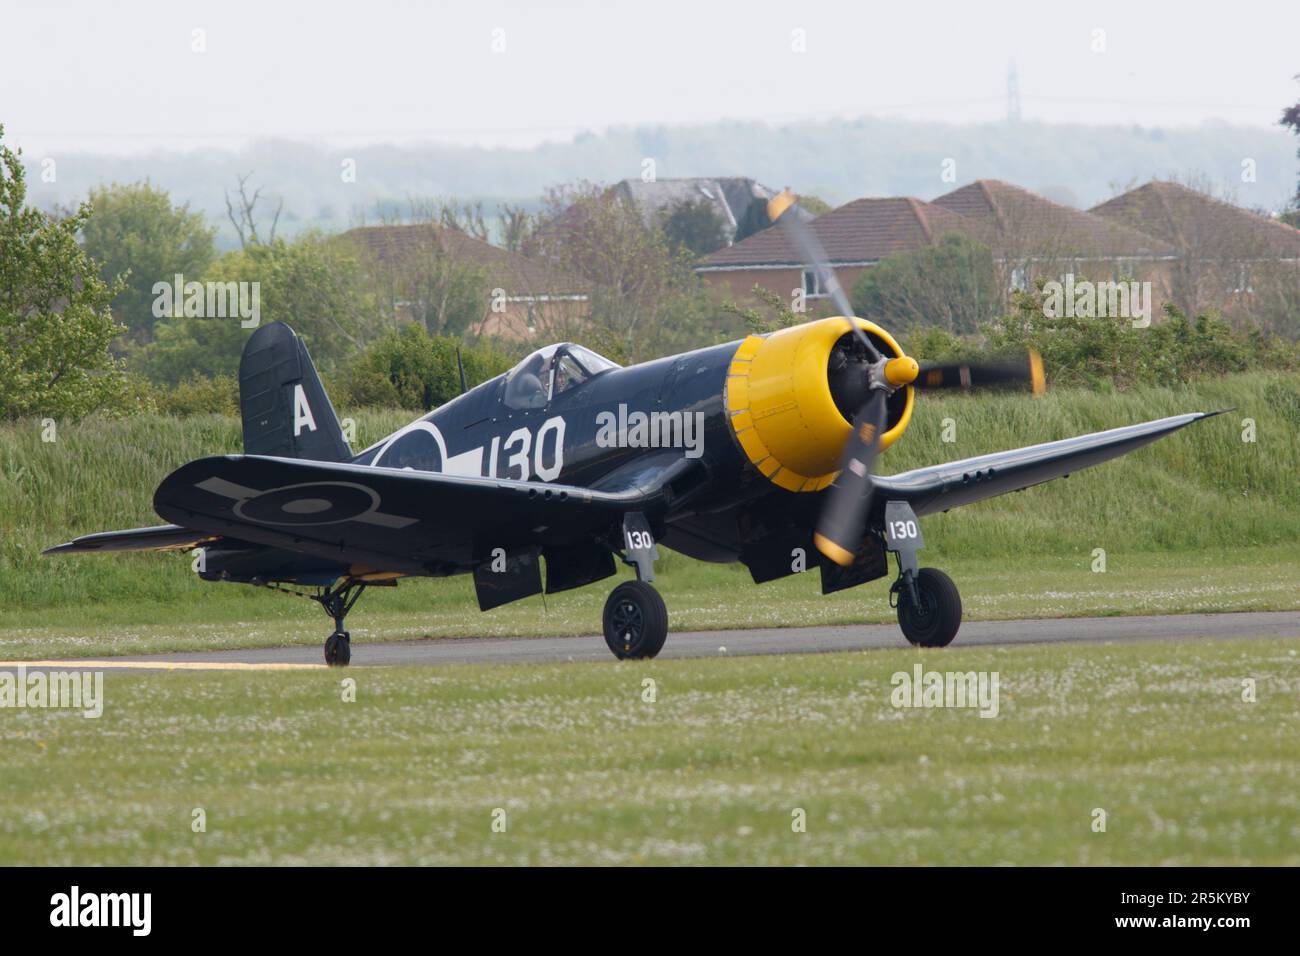 A Corsair taking off for a flying display at RAF Duxford in Cambridgeshire England, 2023 Stock Photo